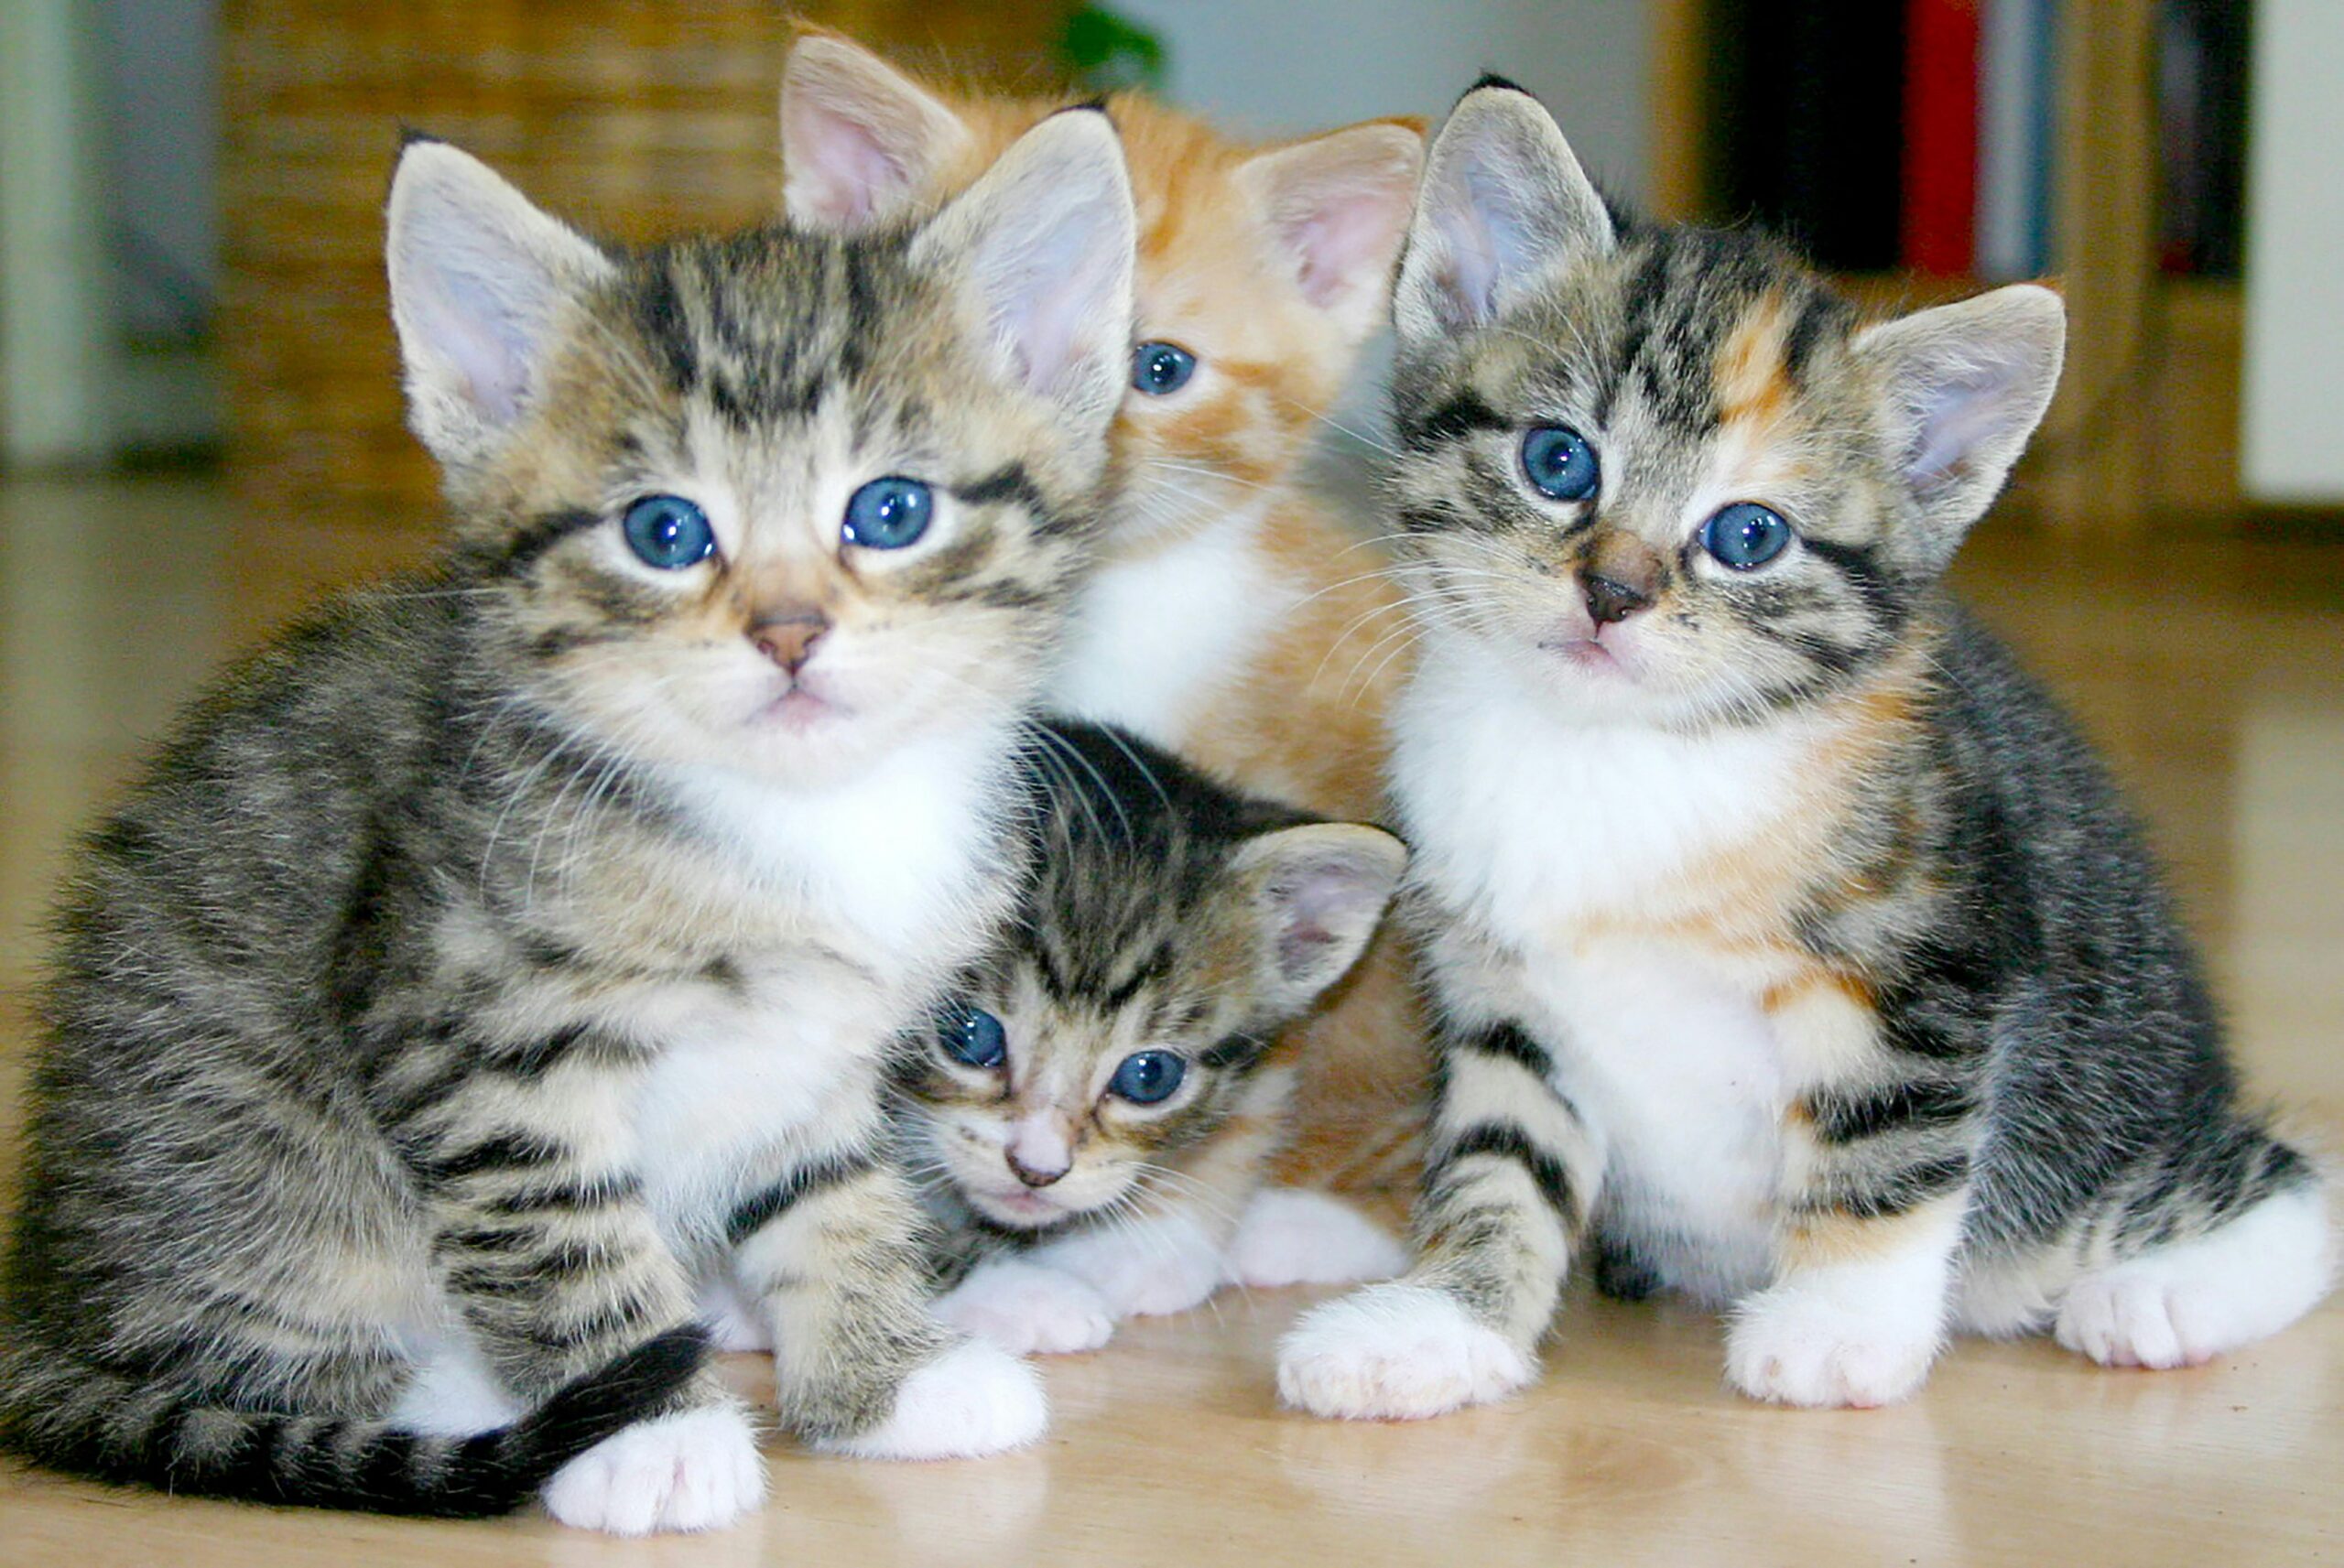 Four kittens with blue eyes staring at the camera